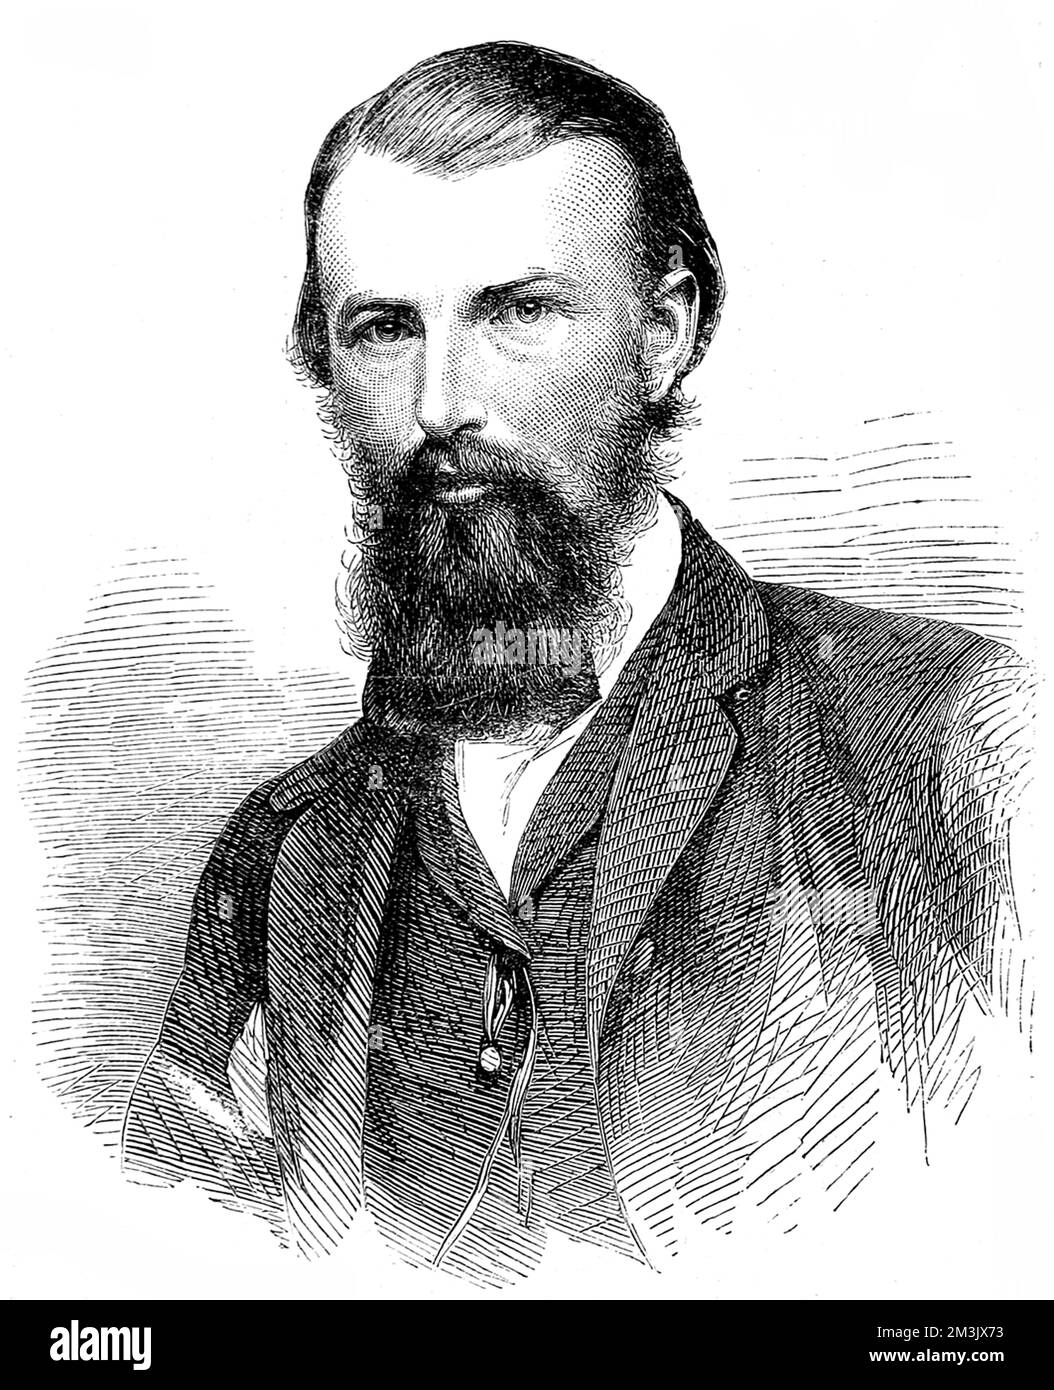 William John Wills (1834 - 1861), Australian surveyor and explorer, pictured in 1860.   Wills was born in England and emigrated to Australia in 1852, joining the staff of Melbourne's observatory. In 1860 he joined Robert O'Hara Burke's expedition to travel across the continent of Australia from South to North, by foot. Burke, Wills and John King reached the north shore of Australia, but only King survived the return journey to Melbourne. Stock Photo